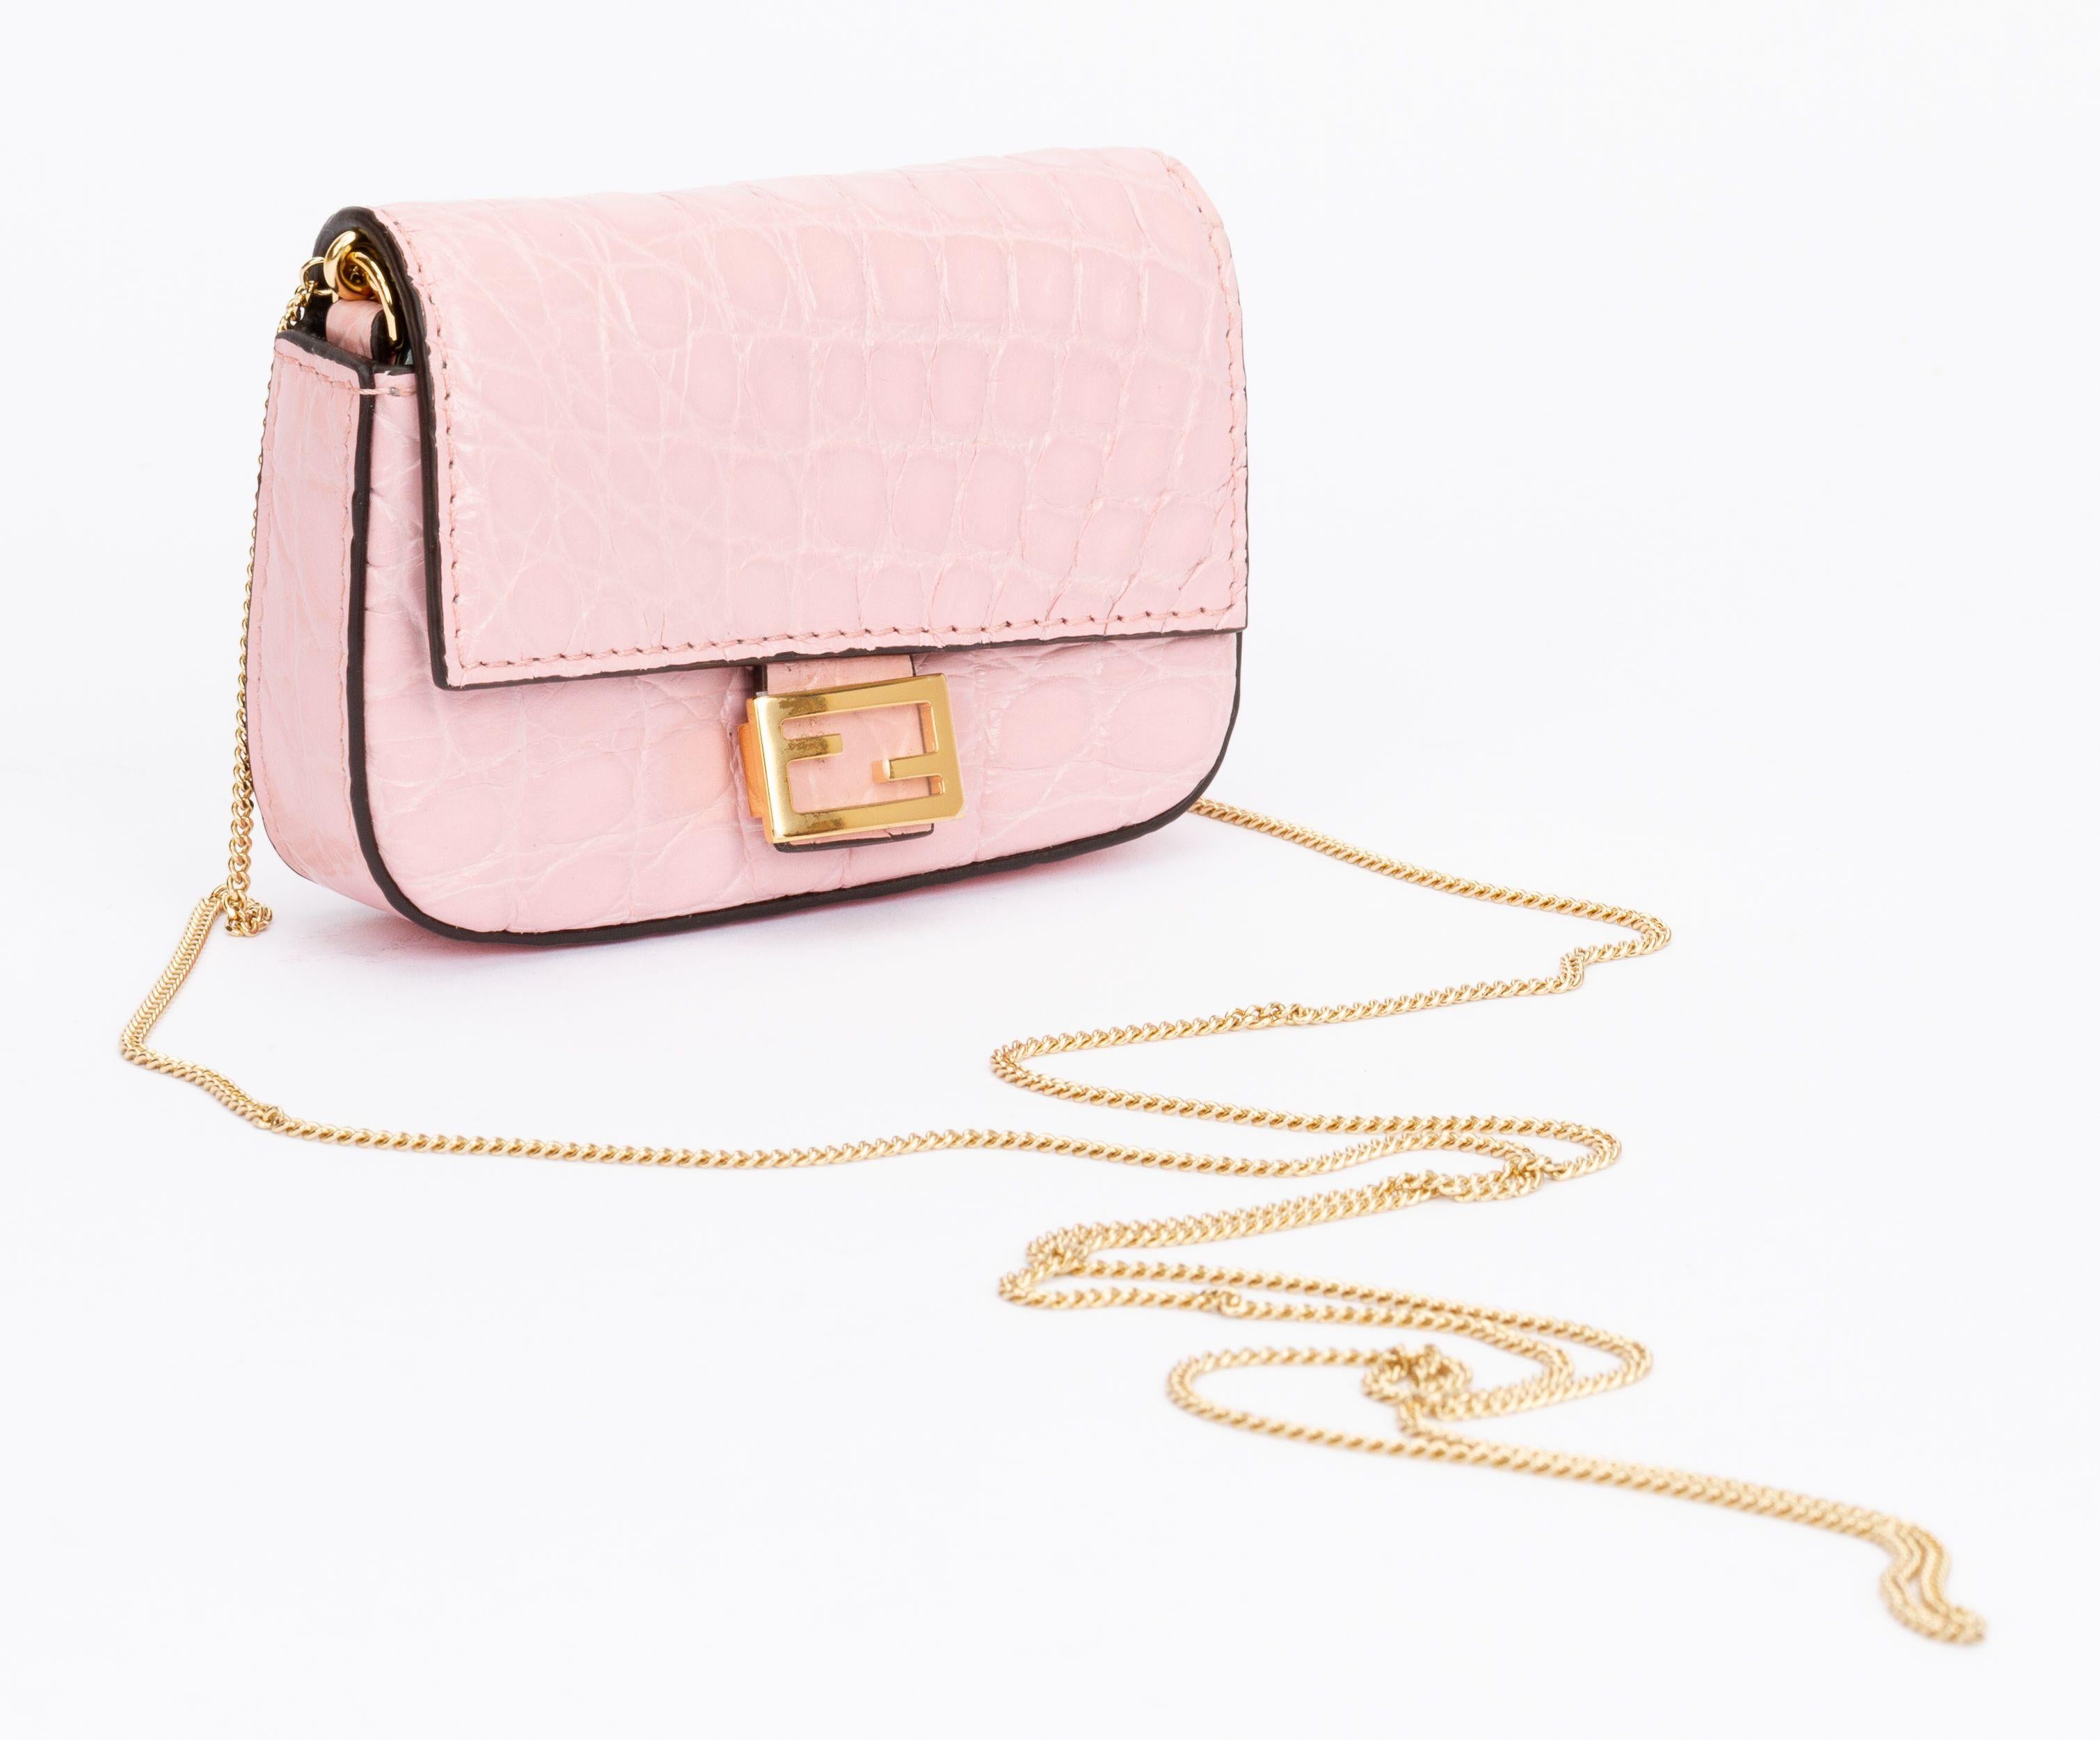 Fendi nano baguette charm made of lamb leather in pink. The pattern of the leather is crocodile skin. The charm can be attached to a bigger bag with the clip or just be worn by itself with the detachable shoulder strap (drop 23.75